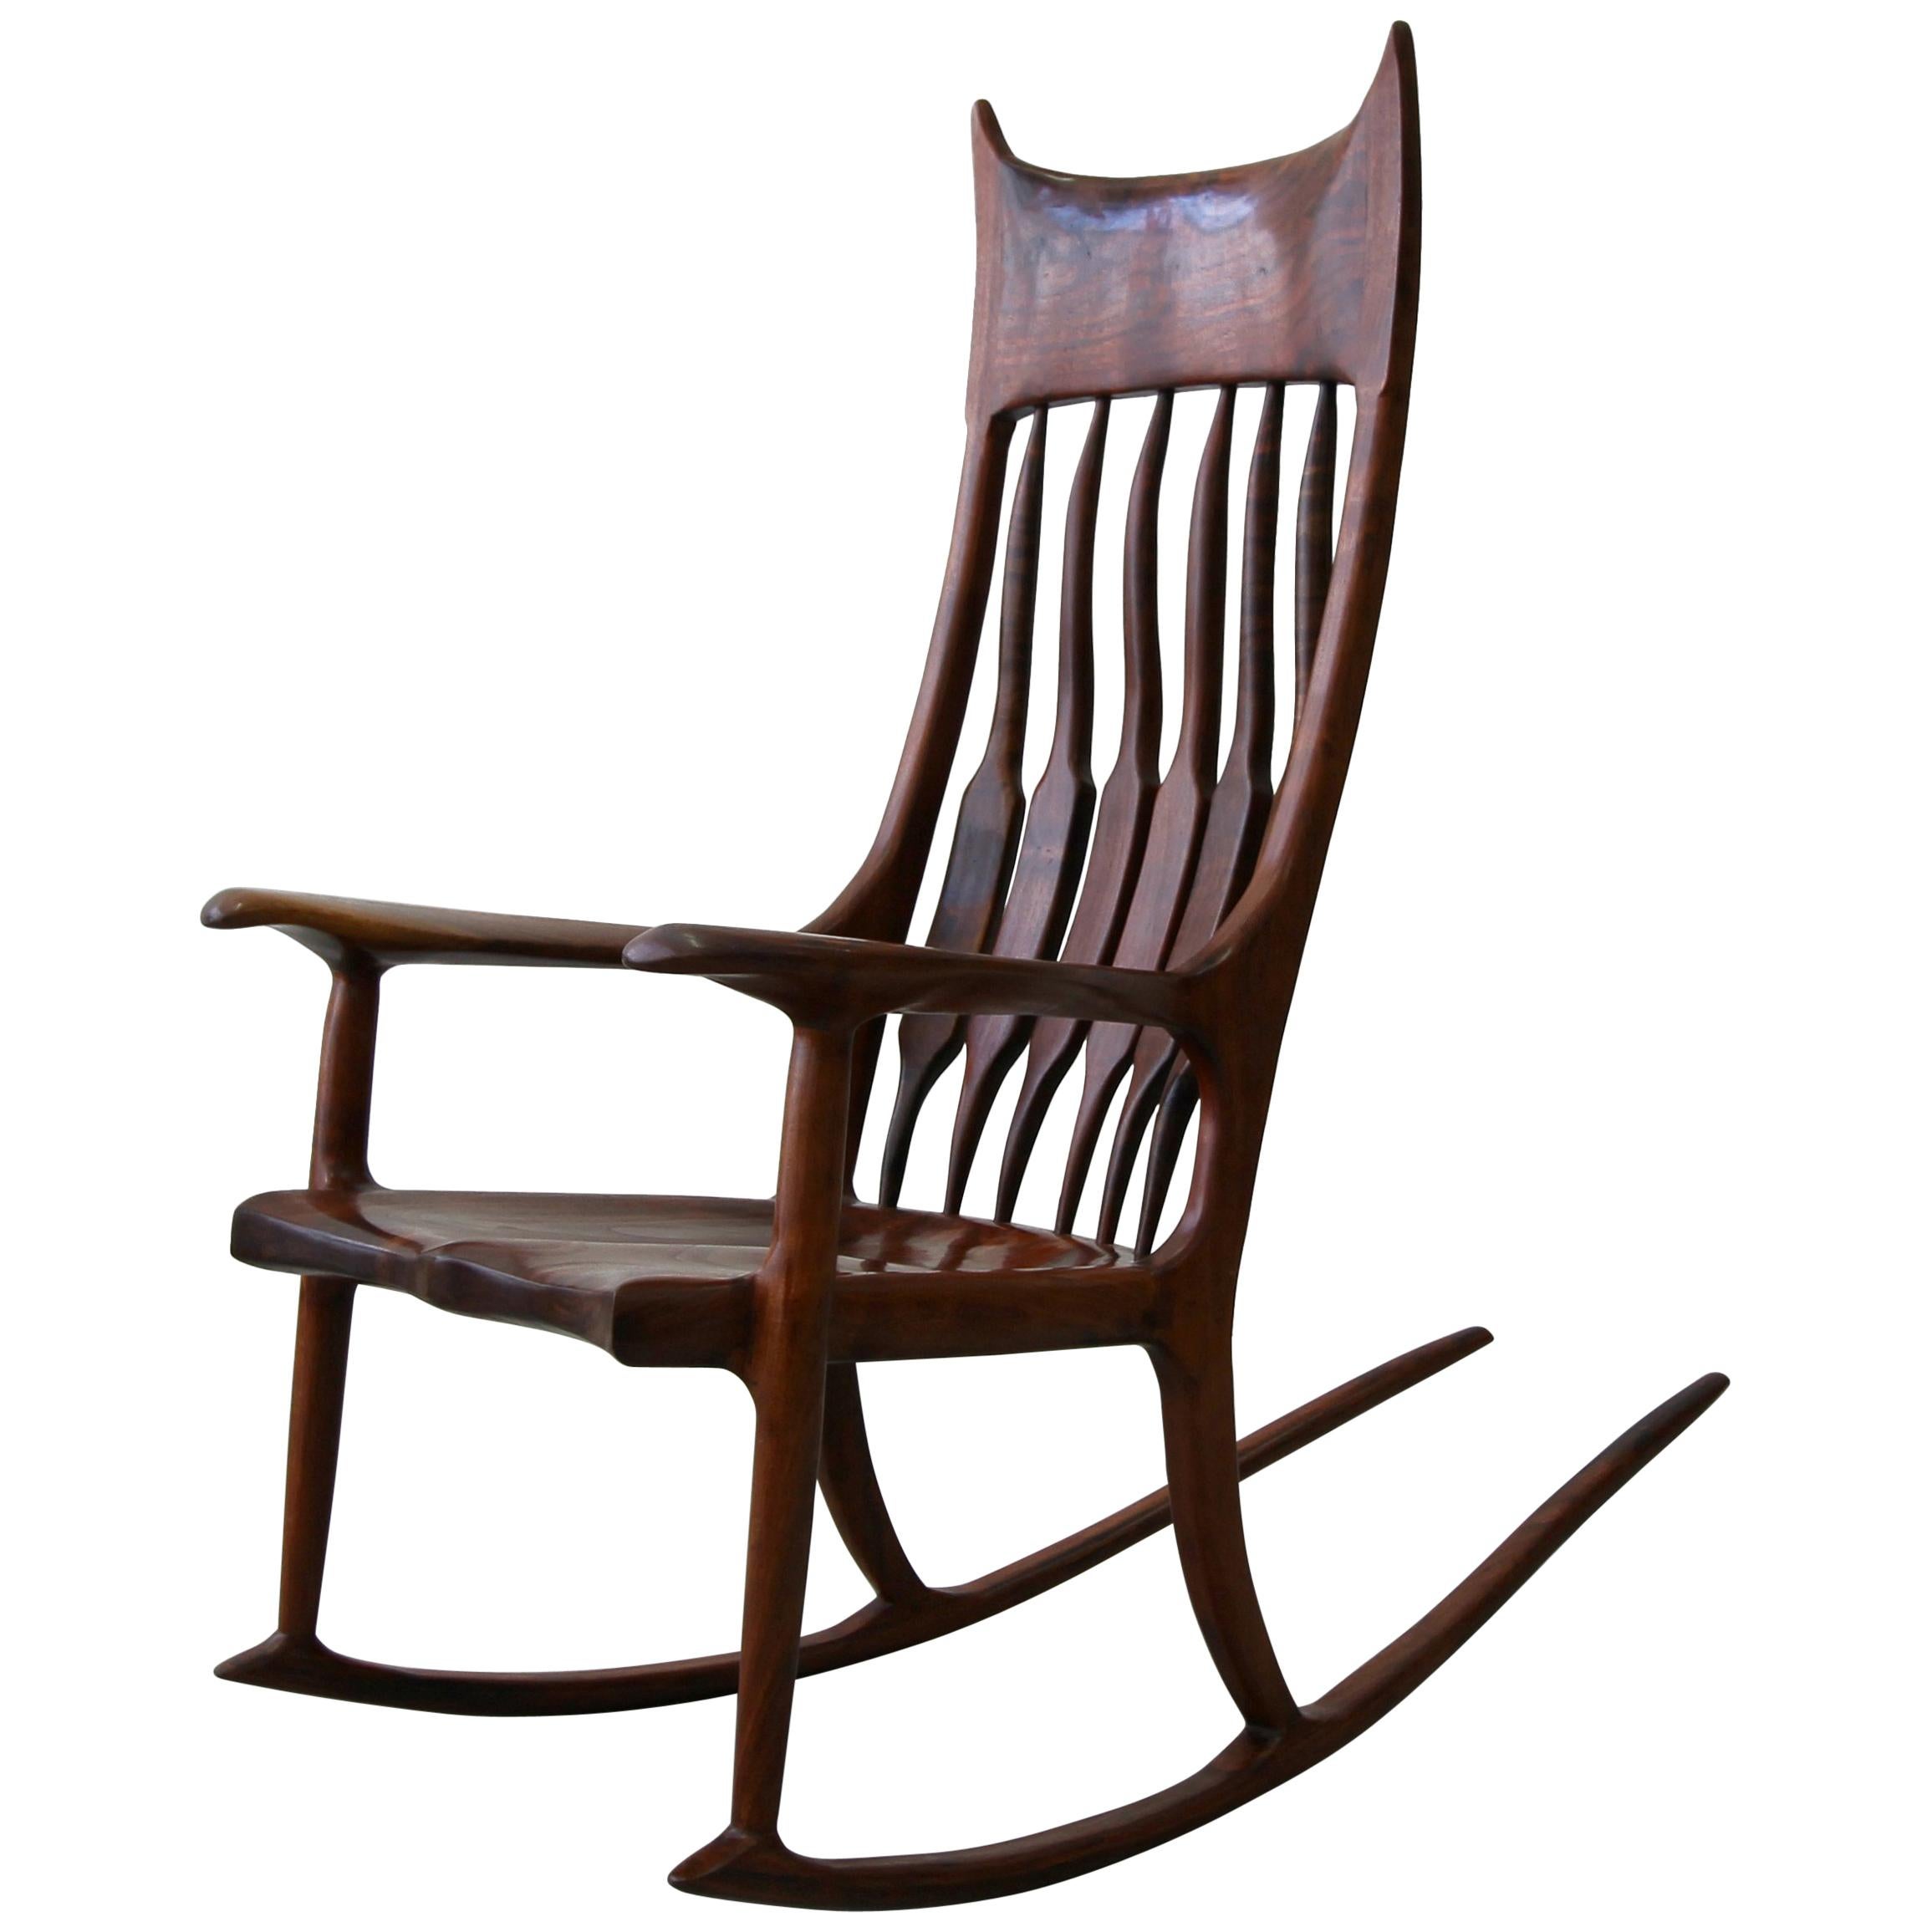 Sculpted Wood Studio Rocking Chair after Sam Maloof